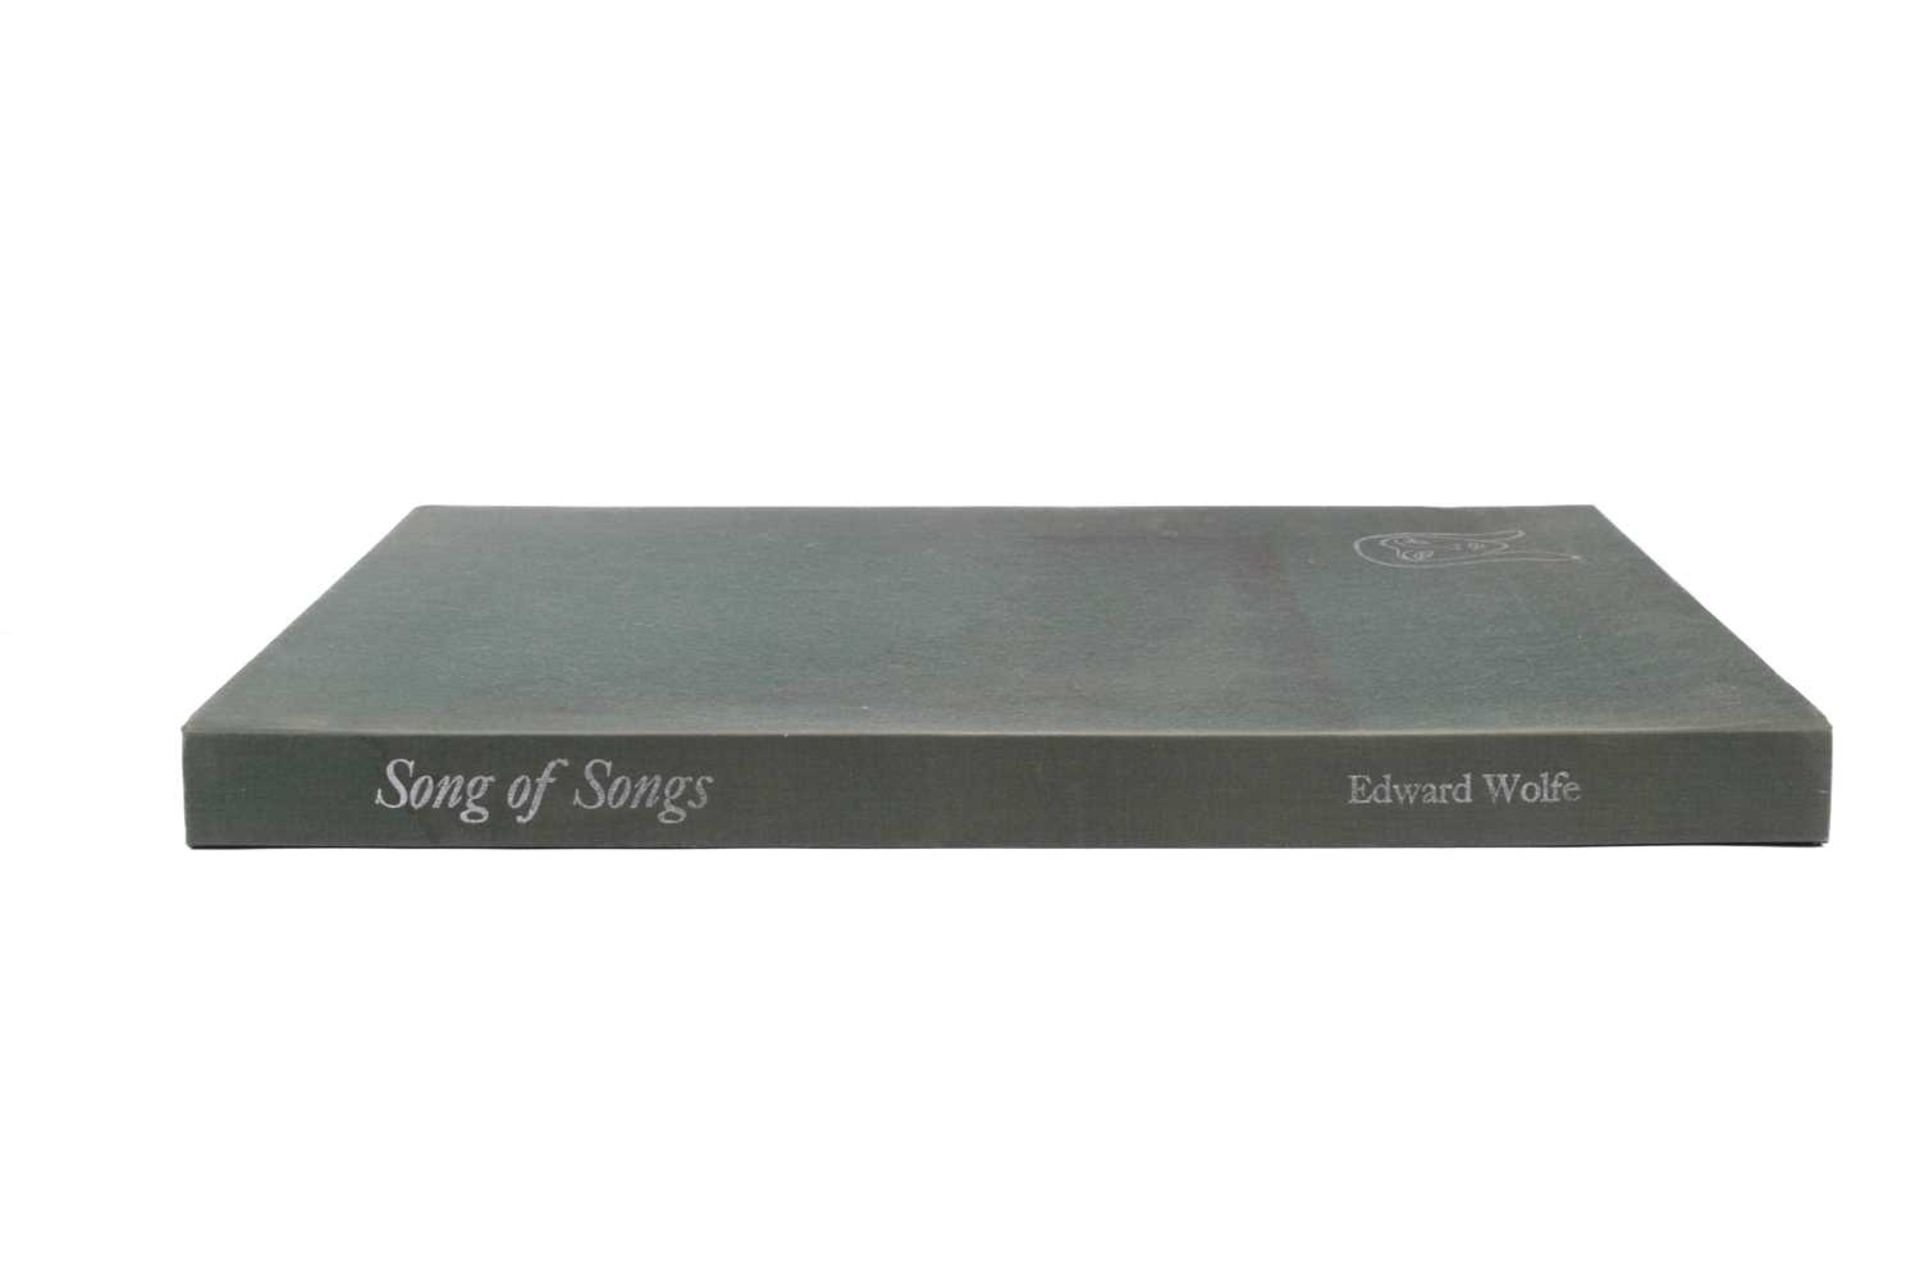 Edward Wolfe (1897-1981), 'Song of Songs', the set of twelve off-set lithographs derived from - Image 17 of 17